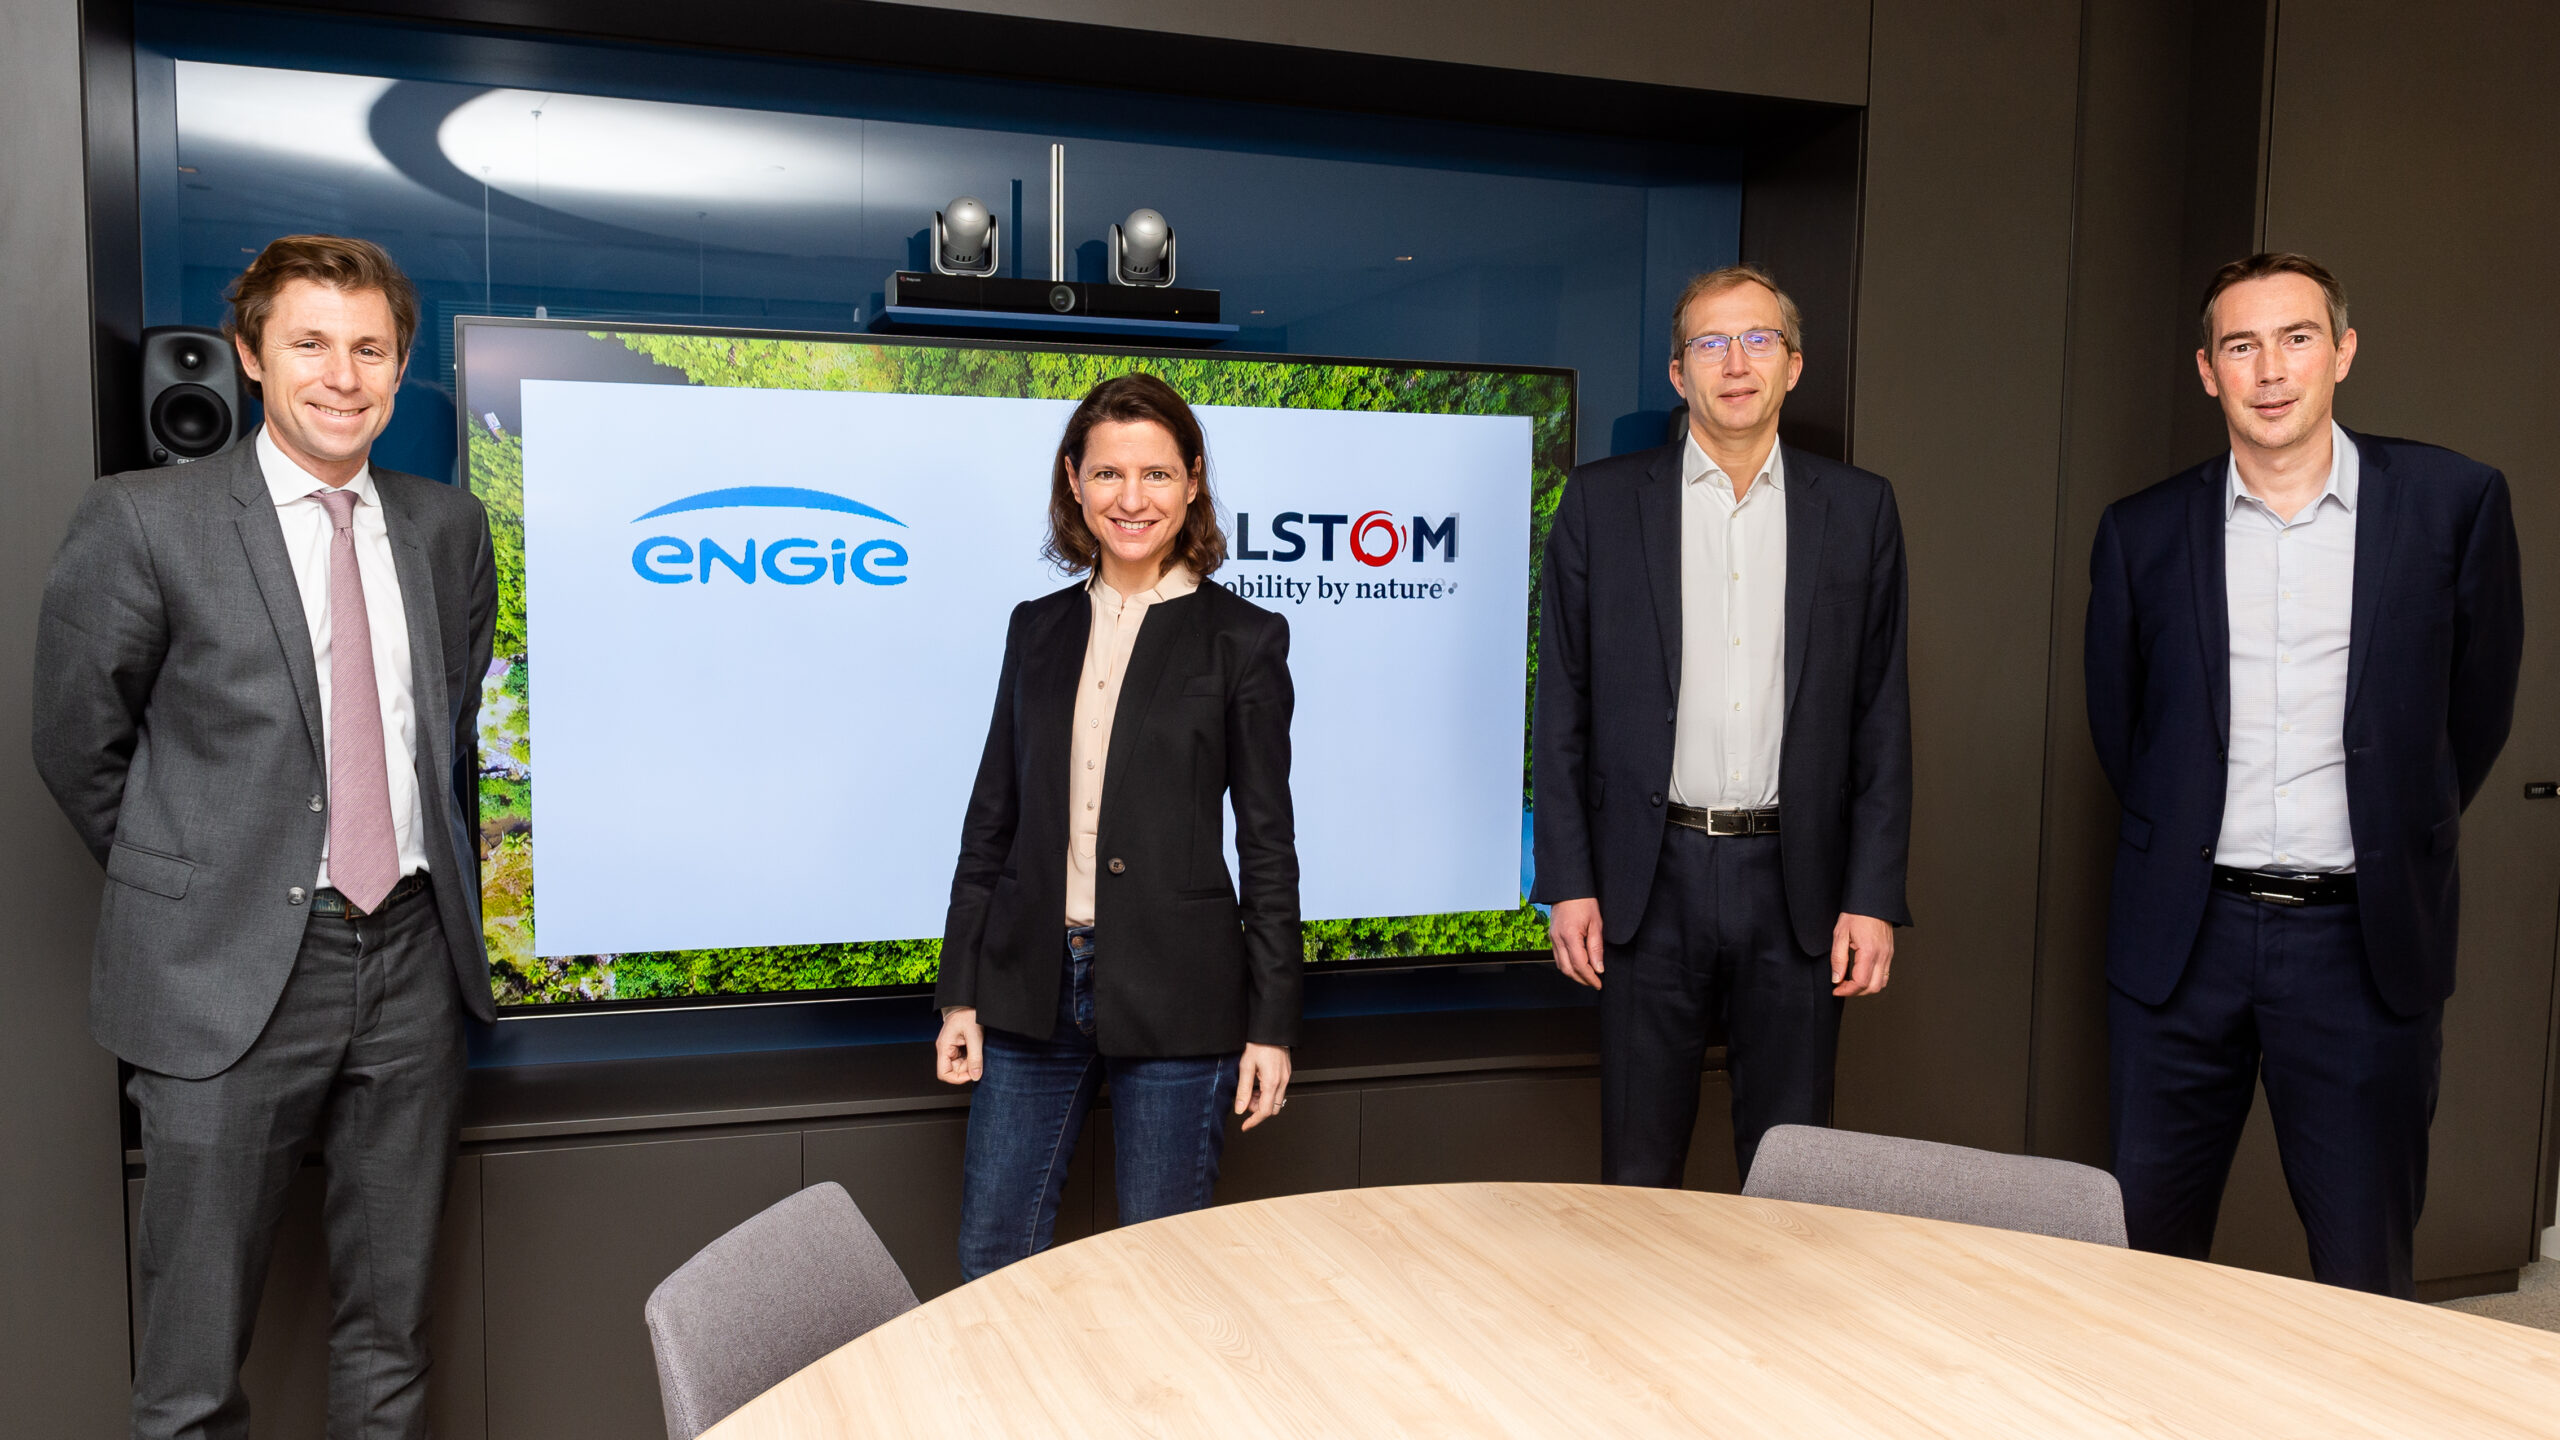 Alstom signs partnership agreement with ENGIE